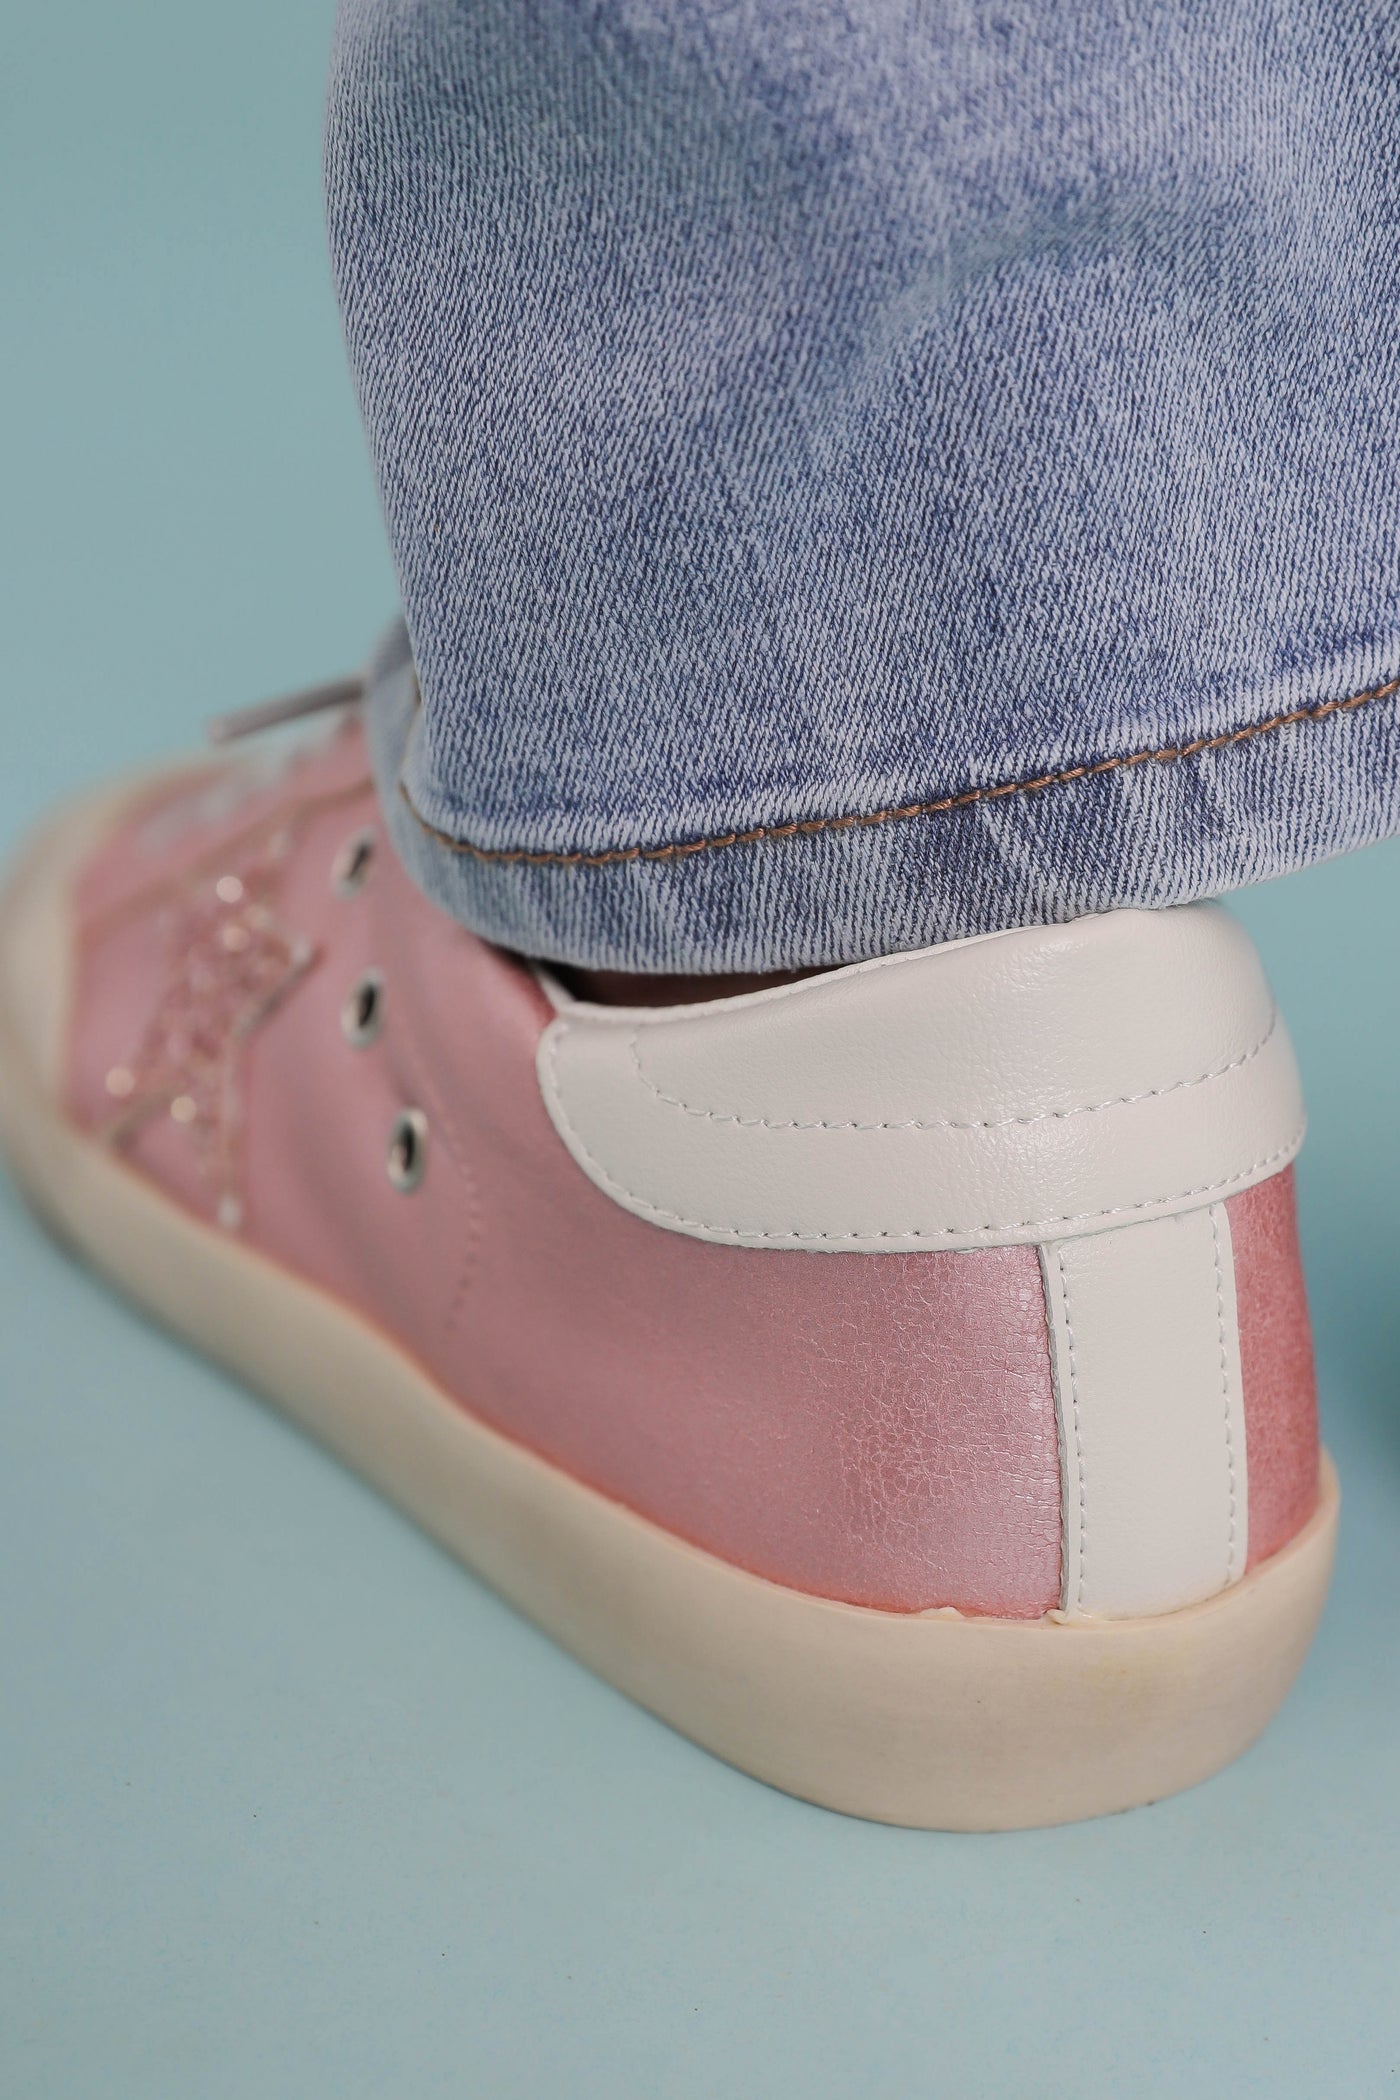 Trendy Star Sneakers- Women's Blush Pink Star Sneakers- MiMi Shoes